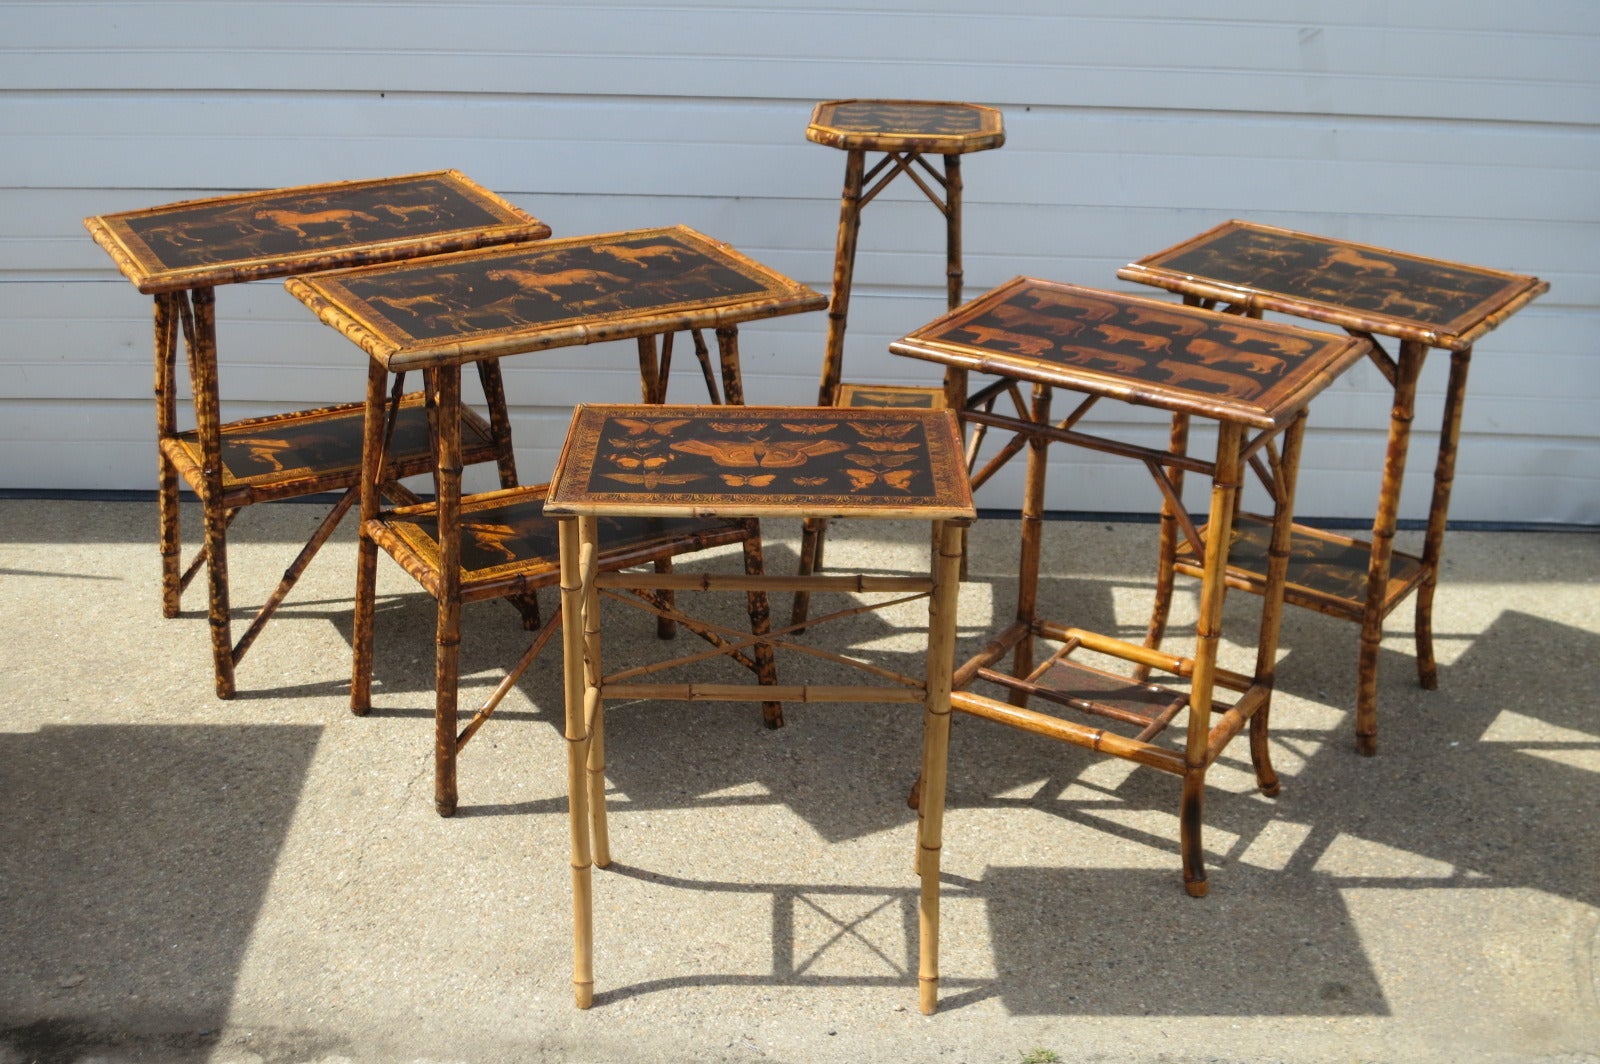 Bamboo Tables With Decoupage Tops For Sale